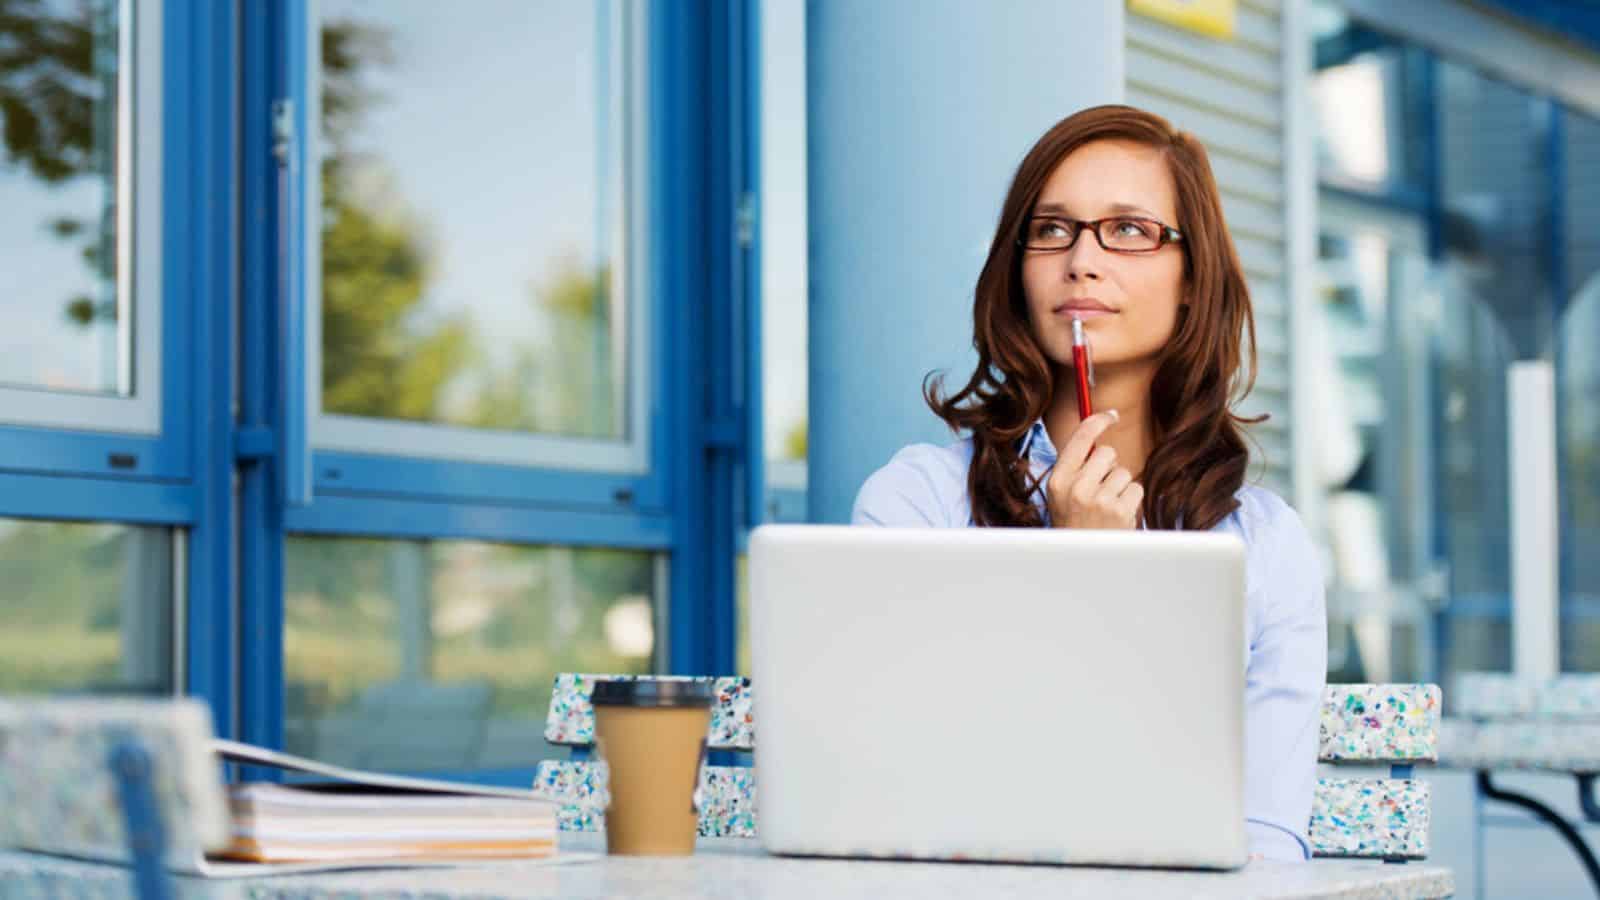 Woman thinking outdoor using laptop